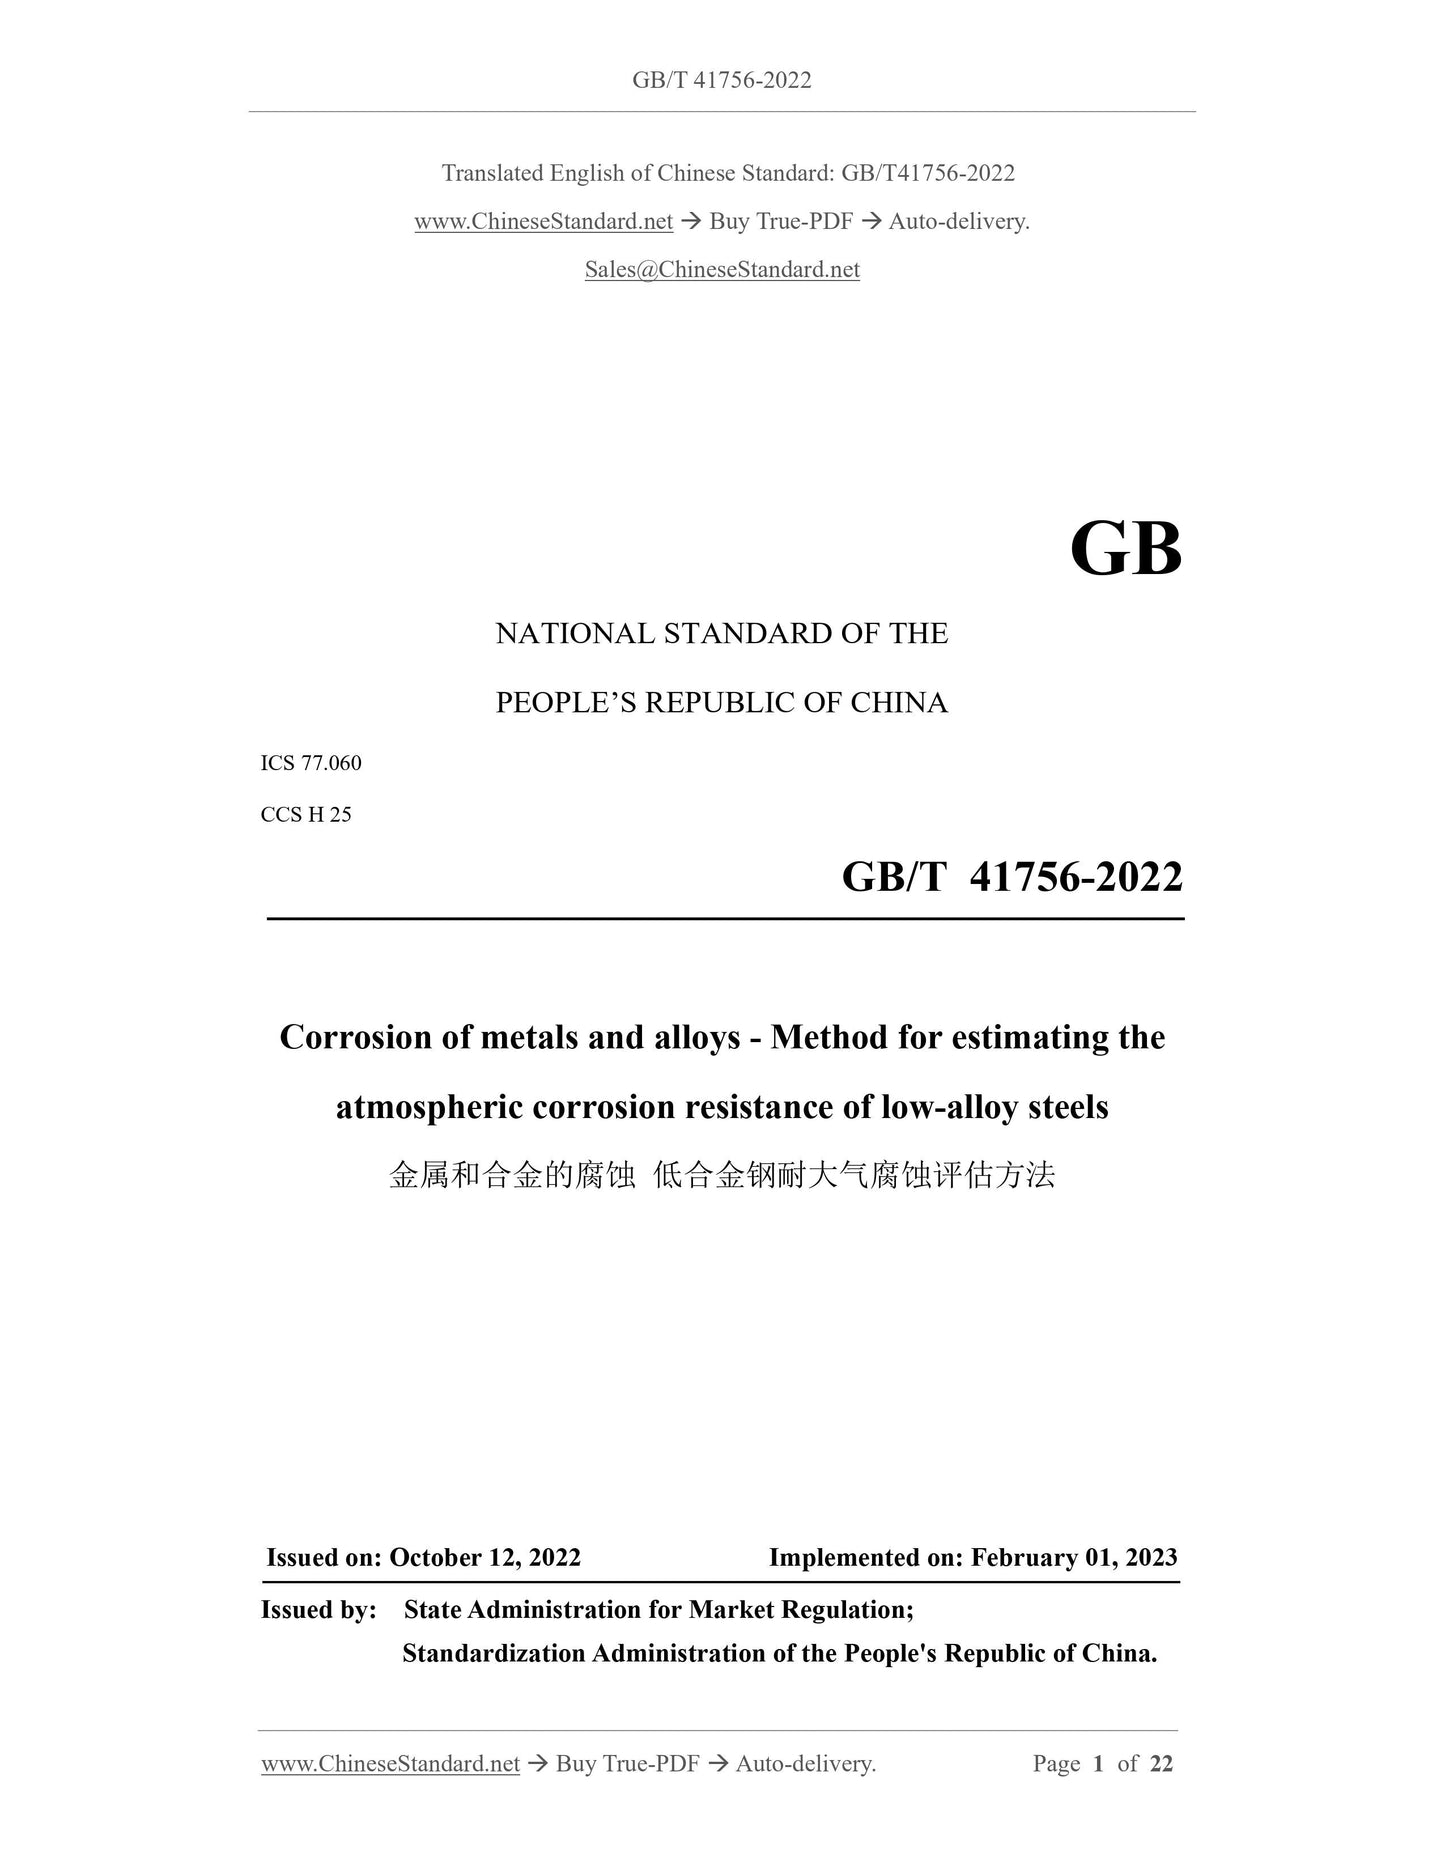 GB/T 41756-2022 Page 1